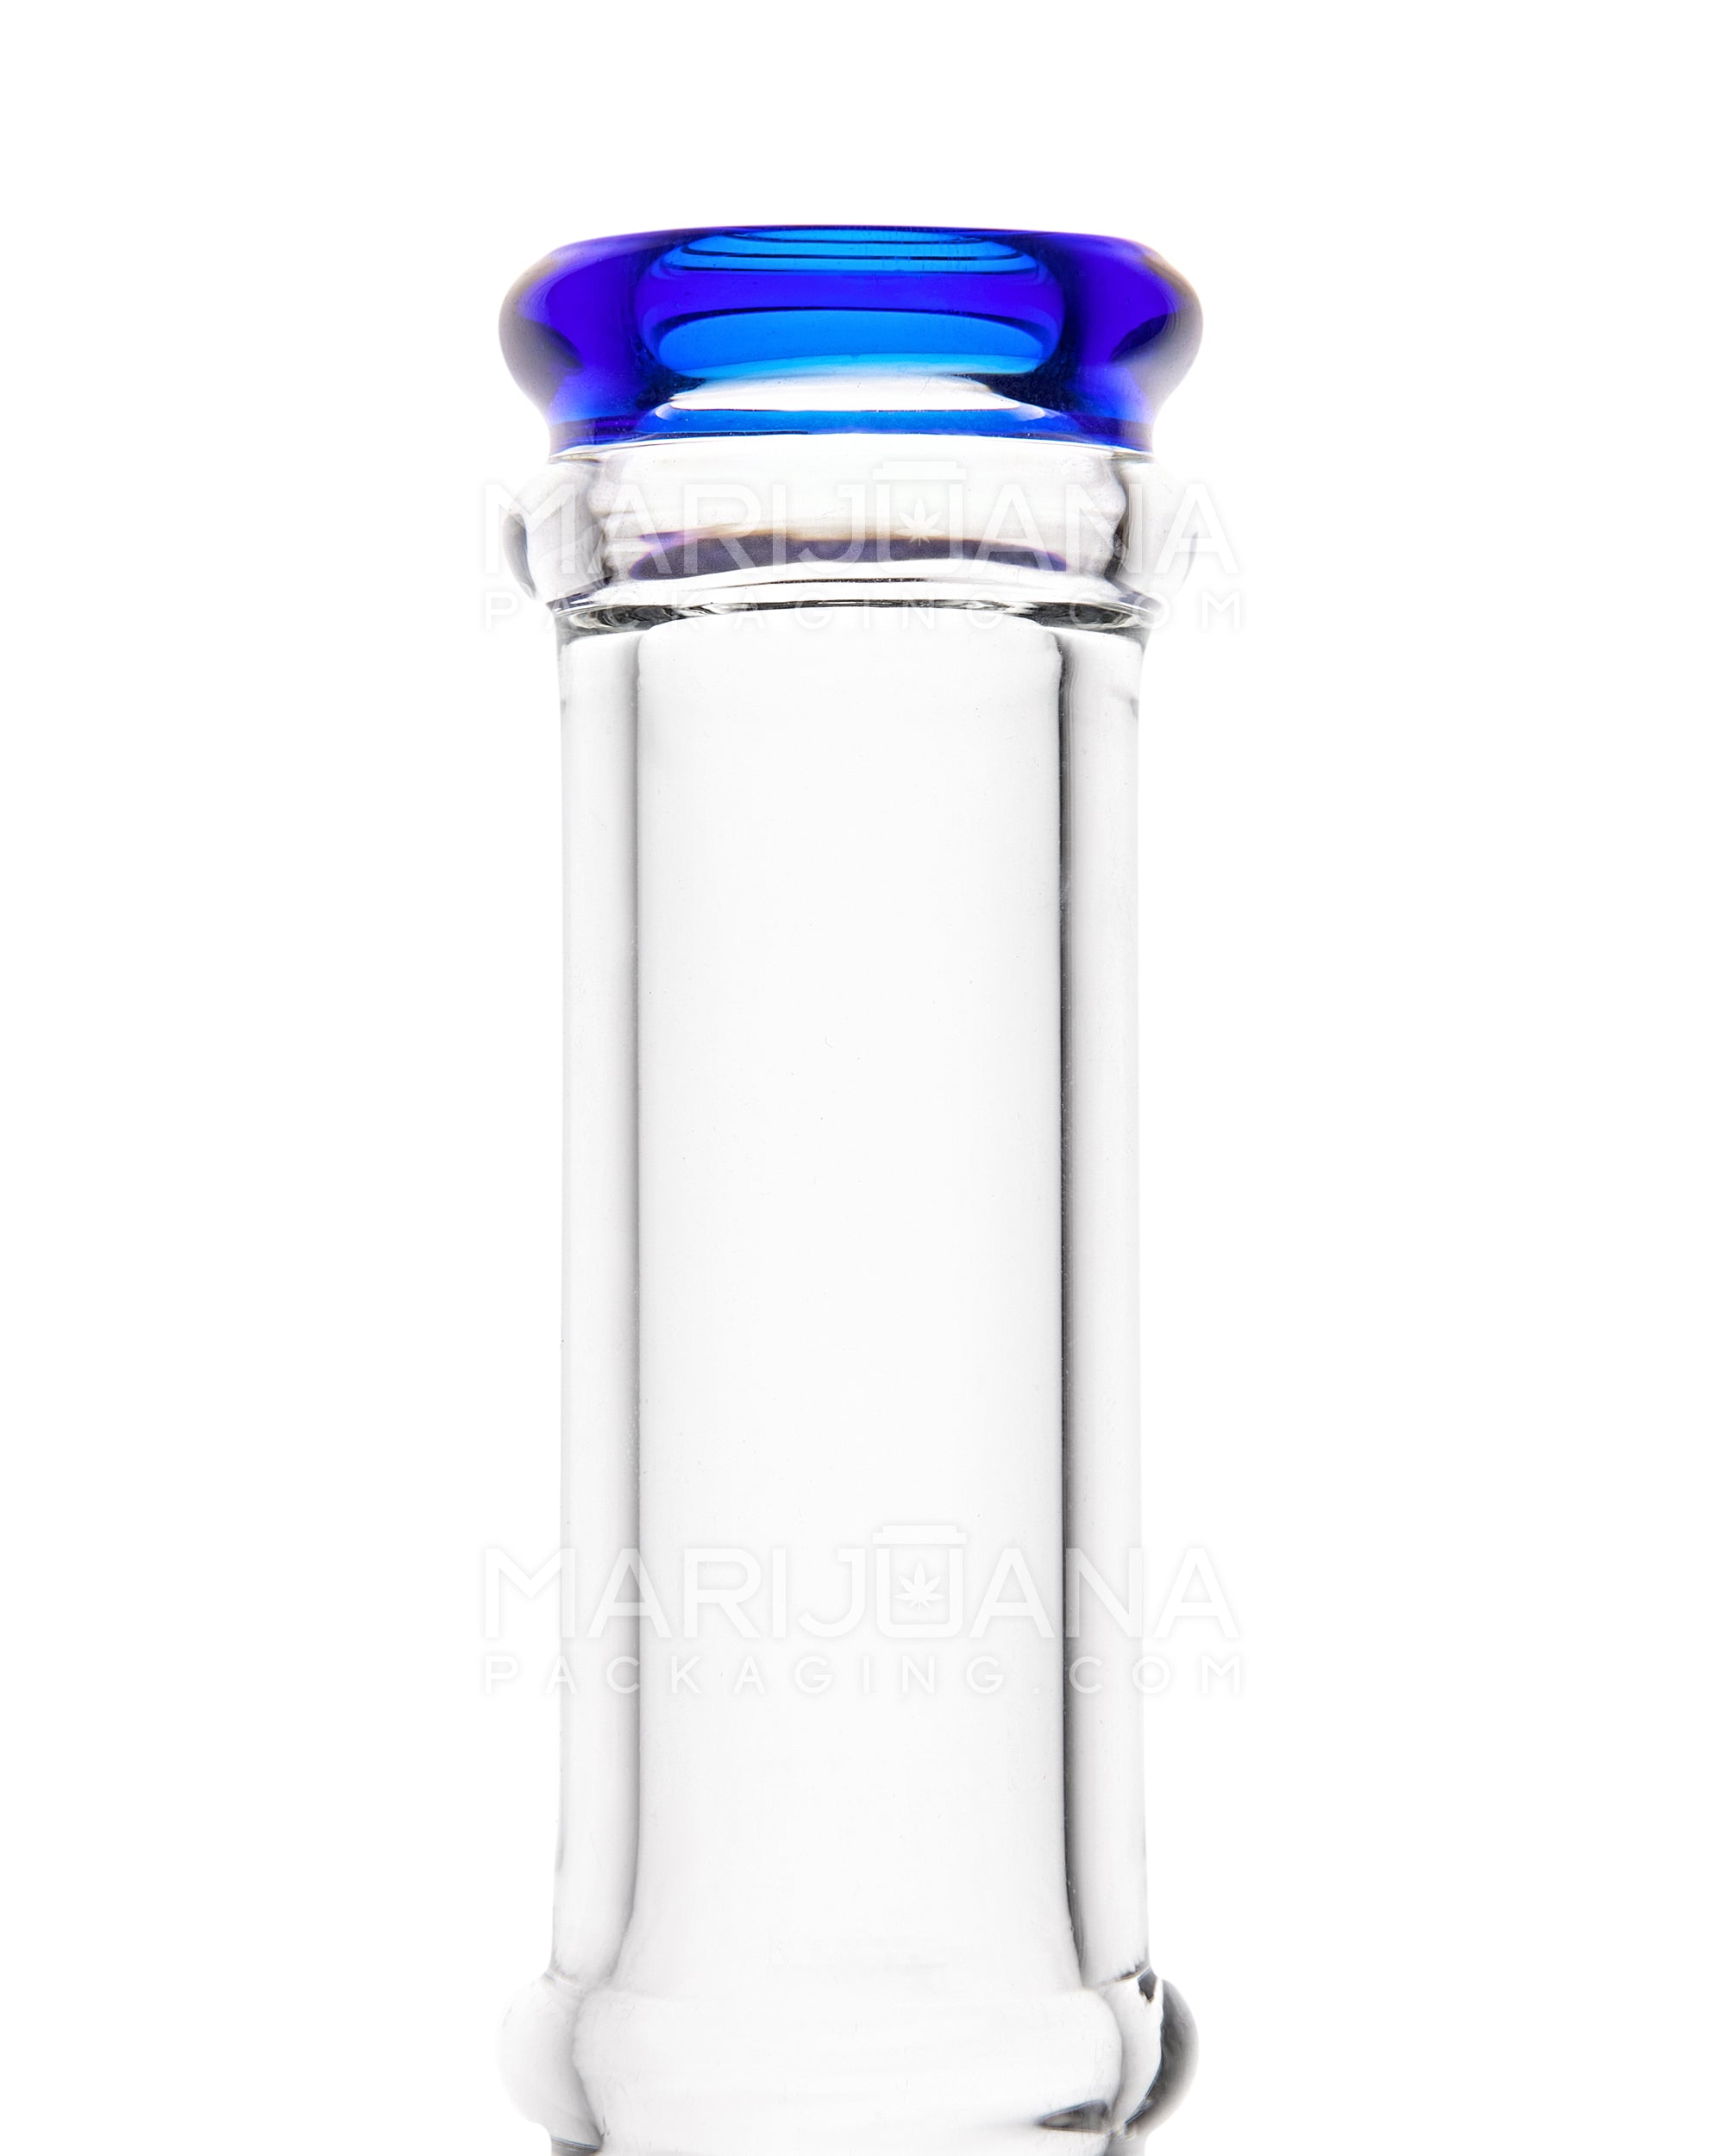 Straight Neck Honeycomb Perc Glass Water Pipe w/ Thick Base | 7.5in Tall - 14mm Bowl - Blue - 4